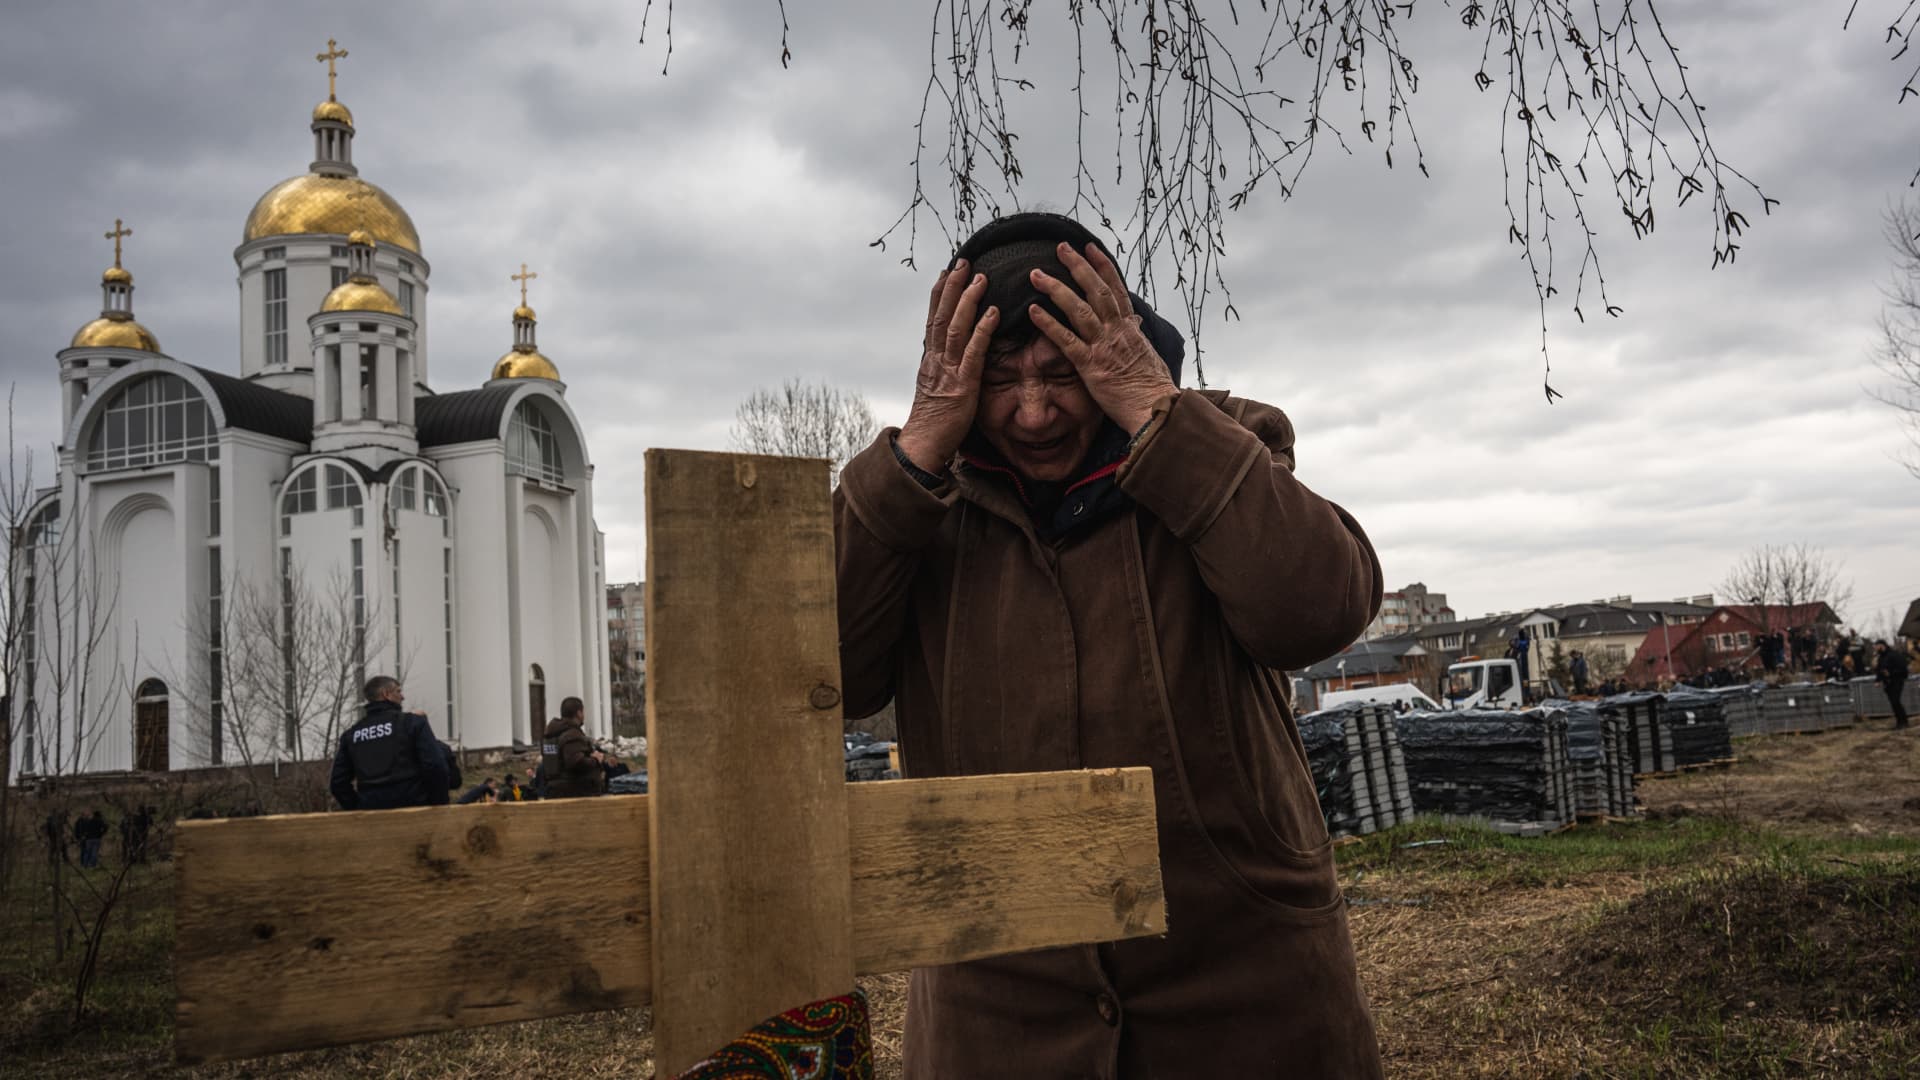 A woman mourns in Bucha, Ukraine, on April 8, 2022. The Office of the U.N. High Commissioner for Human Rights on Monday recorded 4,335 civilian deaths and injuries since Russia's invasion of Ukraine.